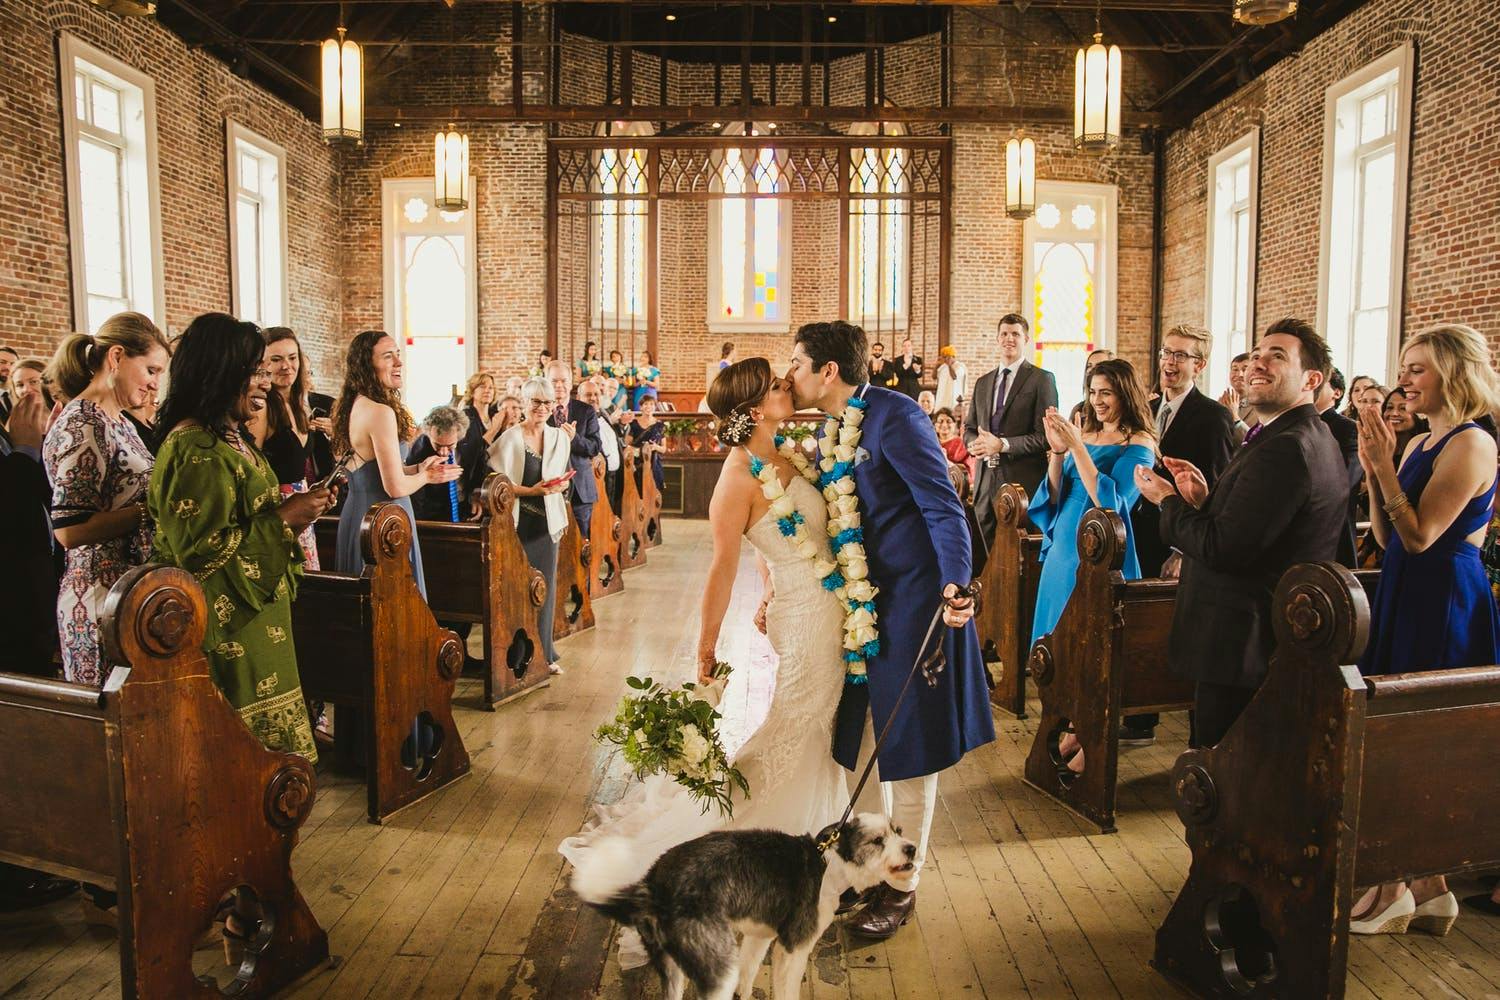 Bride and groom kiss, with dog, at multicultural wedding ceremony in church | PartySlate